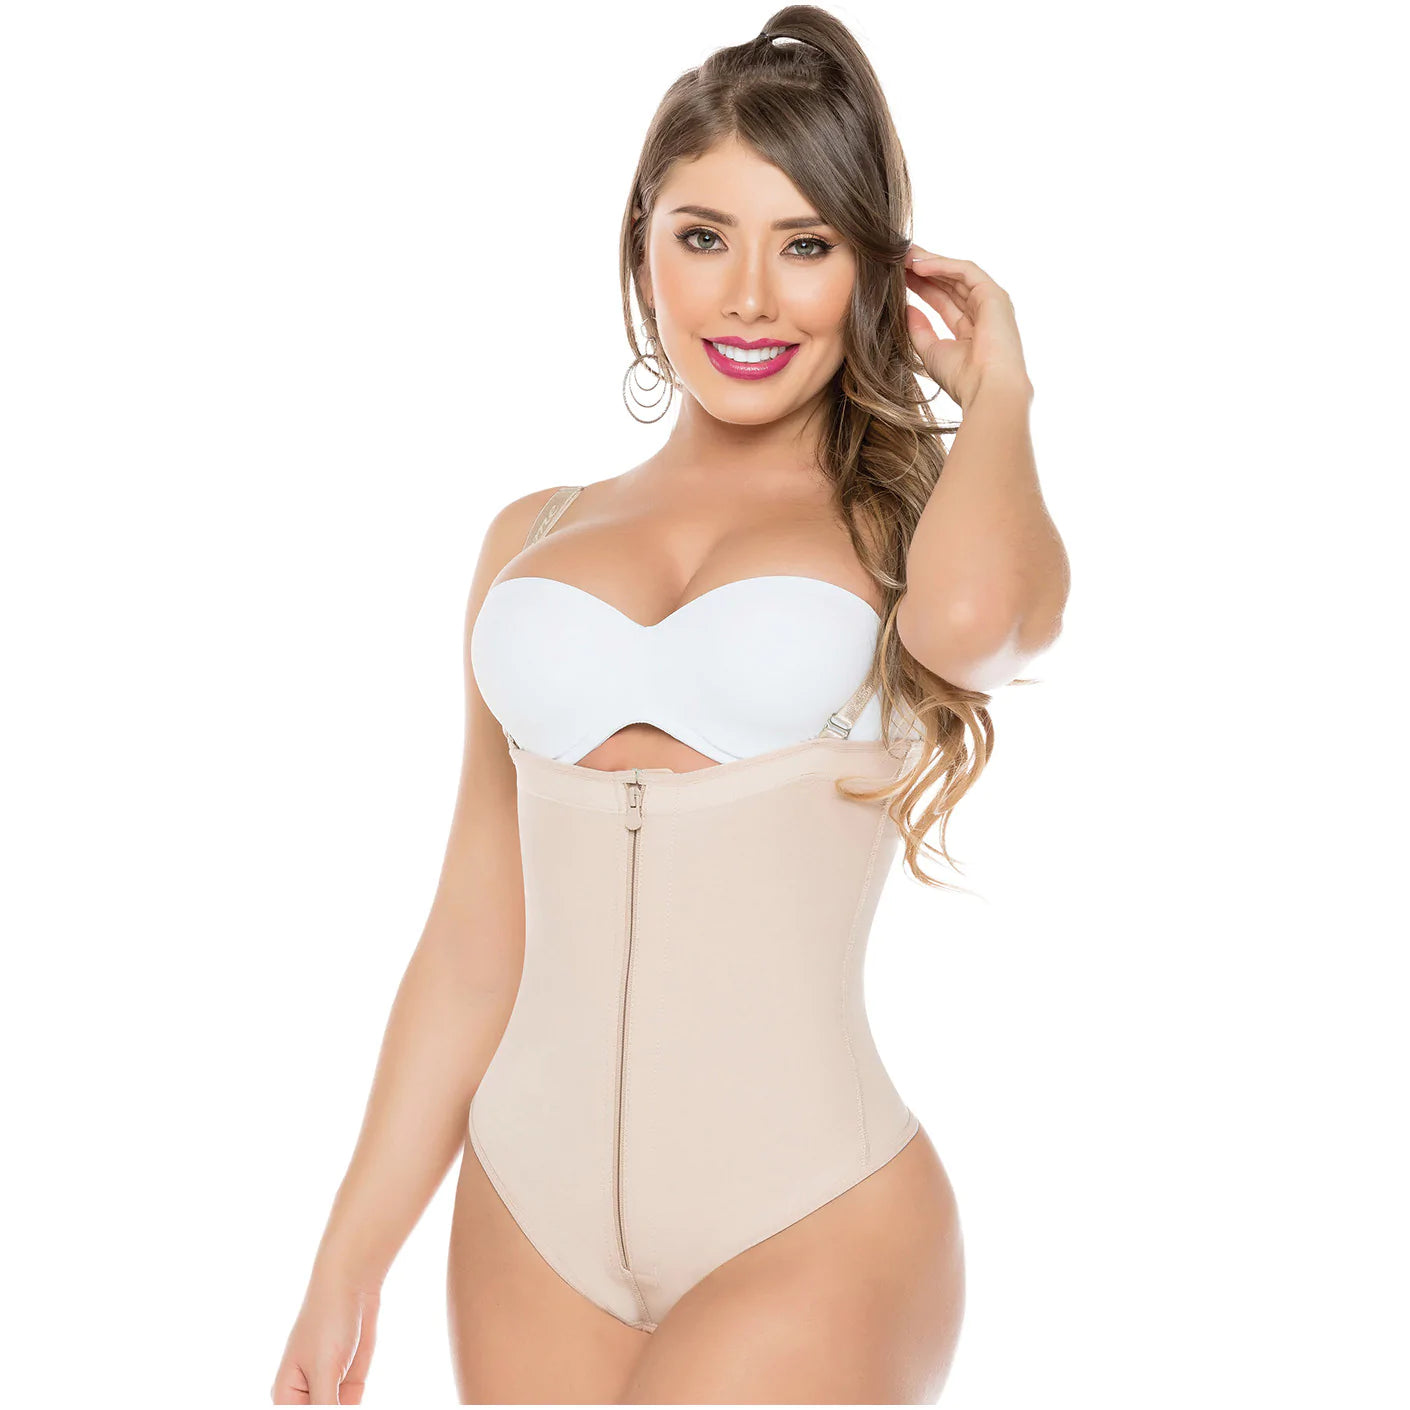 Body Siluette, Intimates & Sleepwear, Body Siluette Reduces Up To 2 Sizes  Instantly